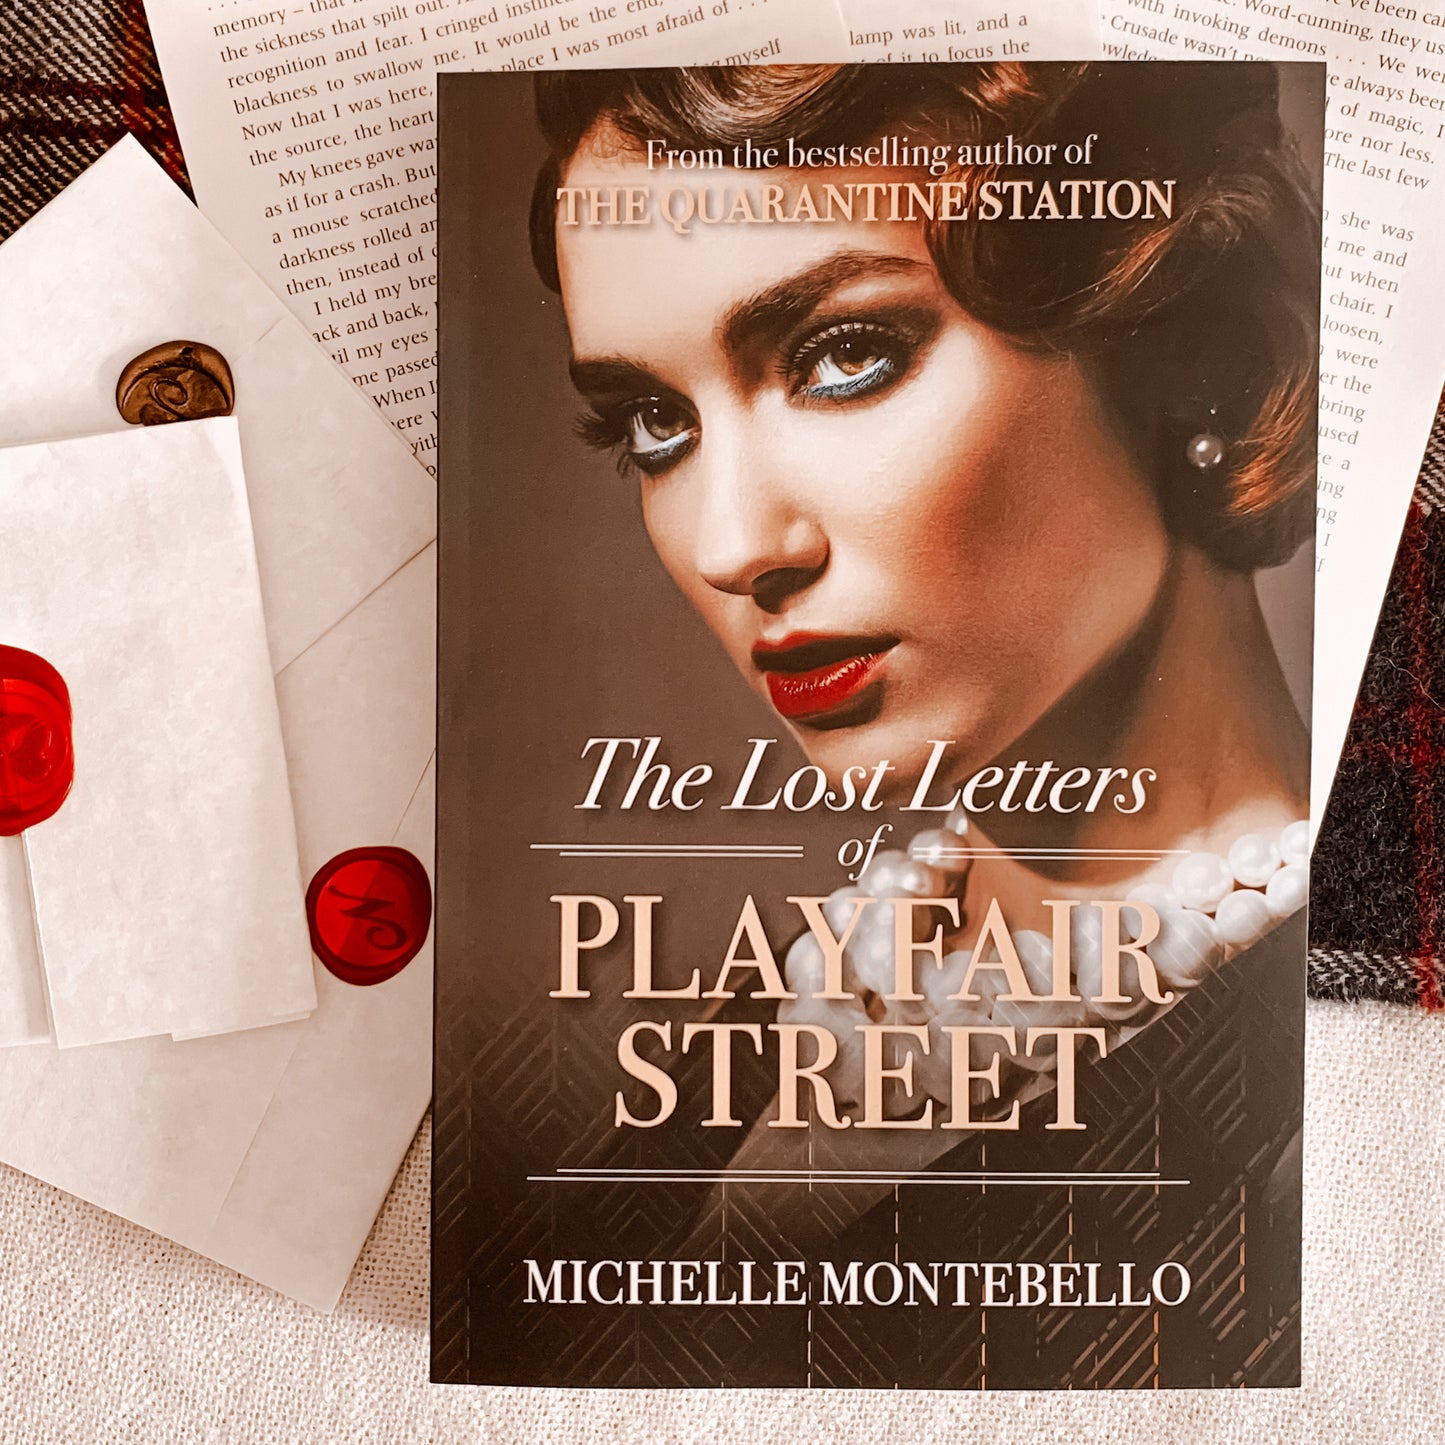 The Lost Letters of Playfair Street by Michelle Montebello